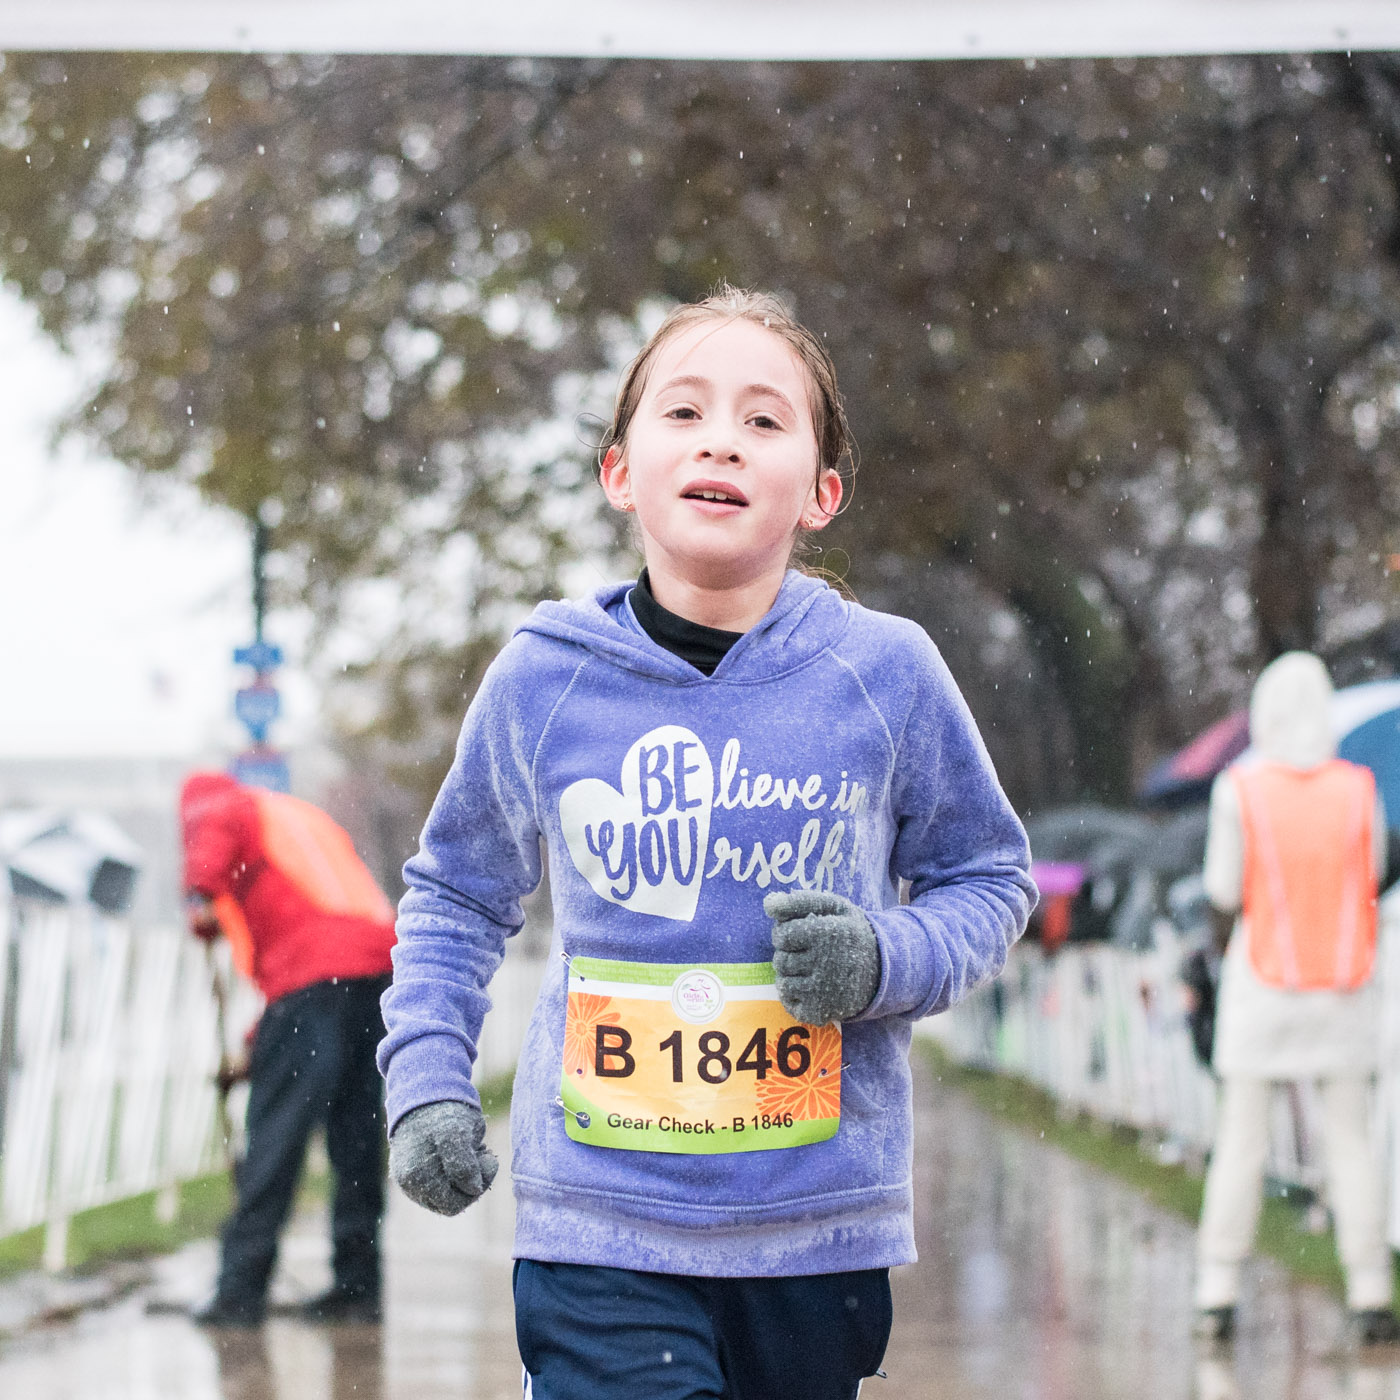 Determination personified at Girls on the Run 5k